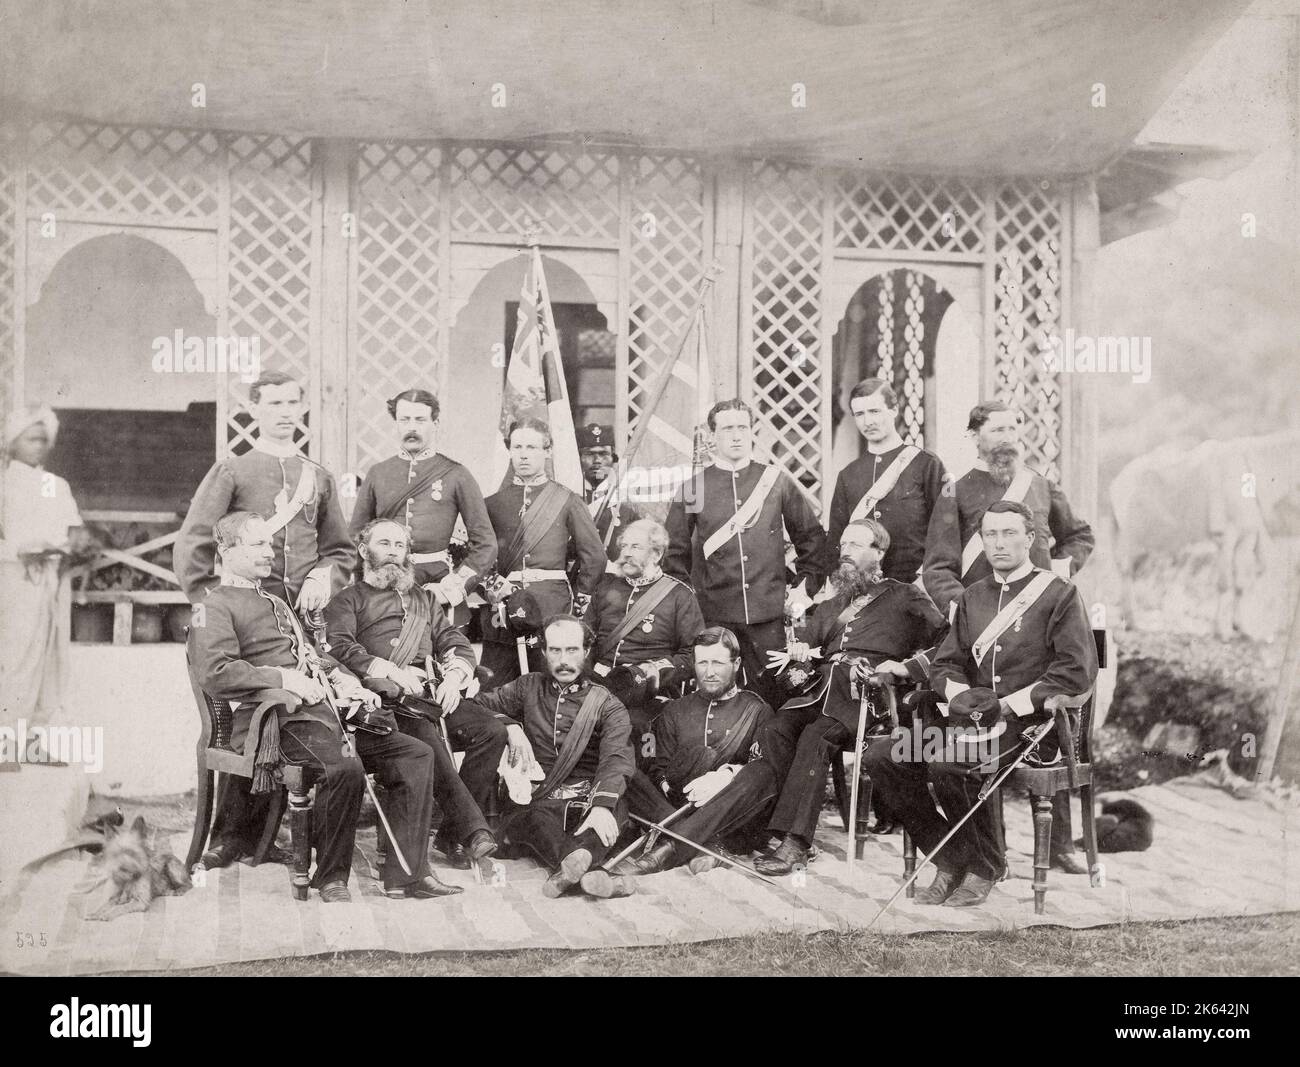 Vintage 19th century photograph - British army in India, 1860s - offficers of the 1st Gurkhas Goorkhas 1863 Stock Photo